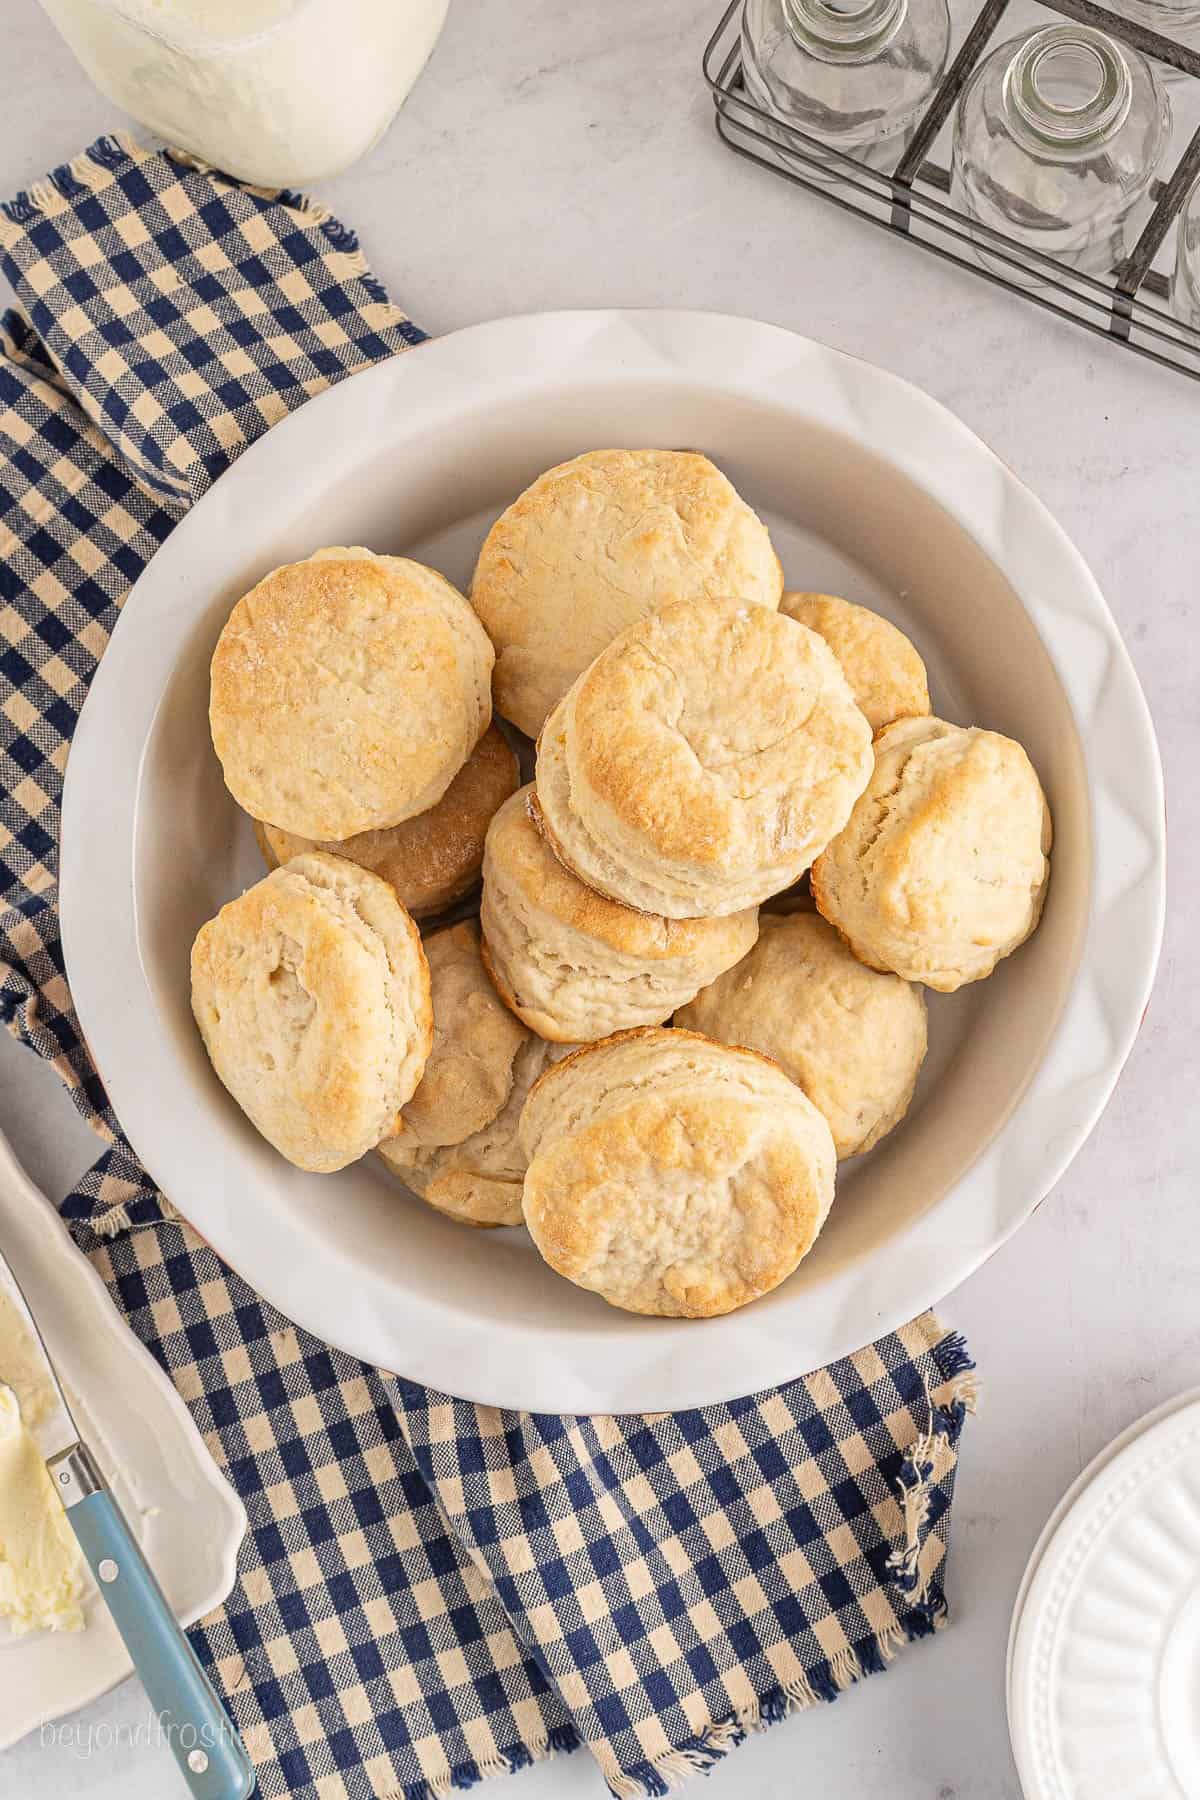 Overhead view of homemade biscuits in a white bowl